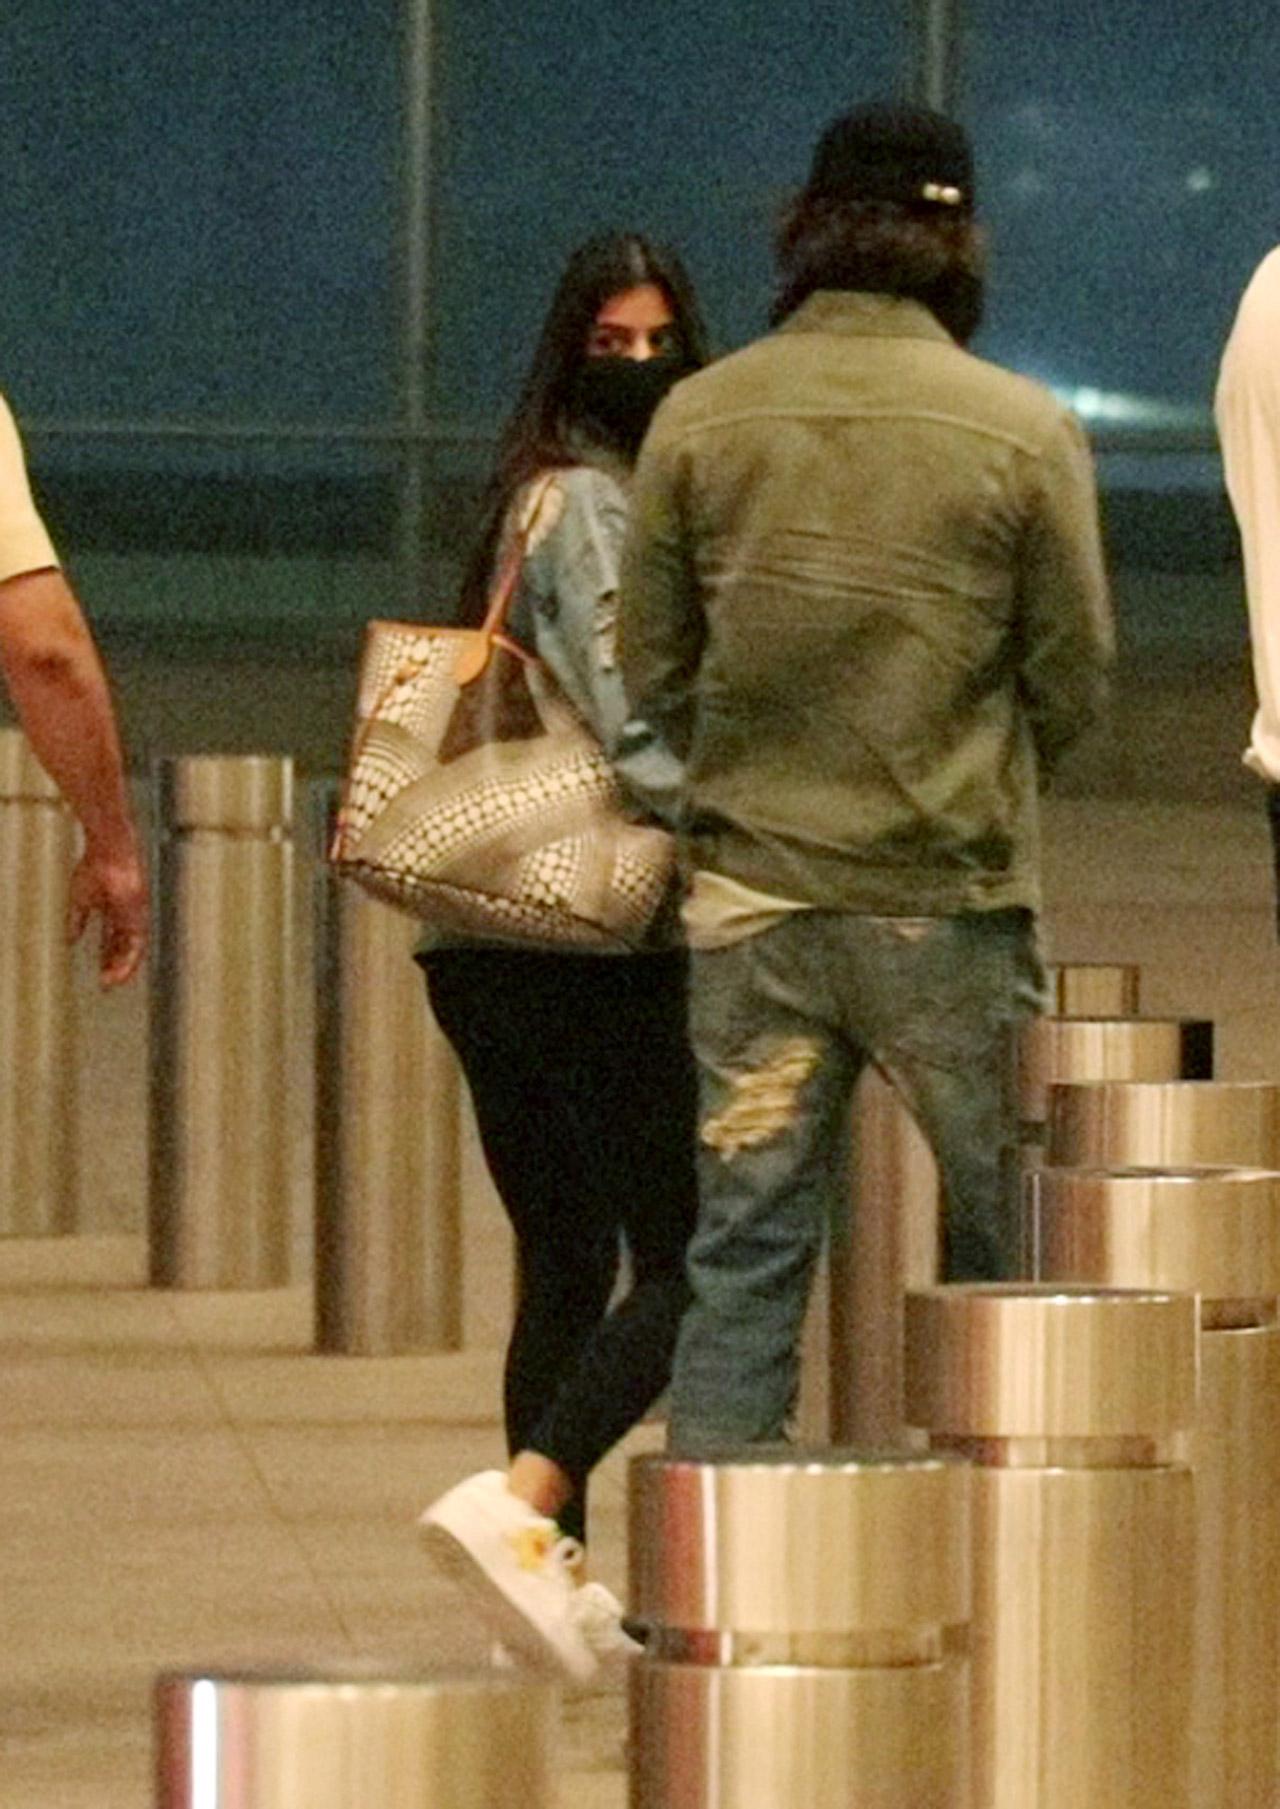 Suhana was in Mumbai and was spotted by paparazzi, as she partied with childhood friends - Shanaya Kapoor, Ananya Panday and Navya Naveli Nanda, last week. In picture: Suhana and SRK clicked at Mumbai Airport.